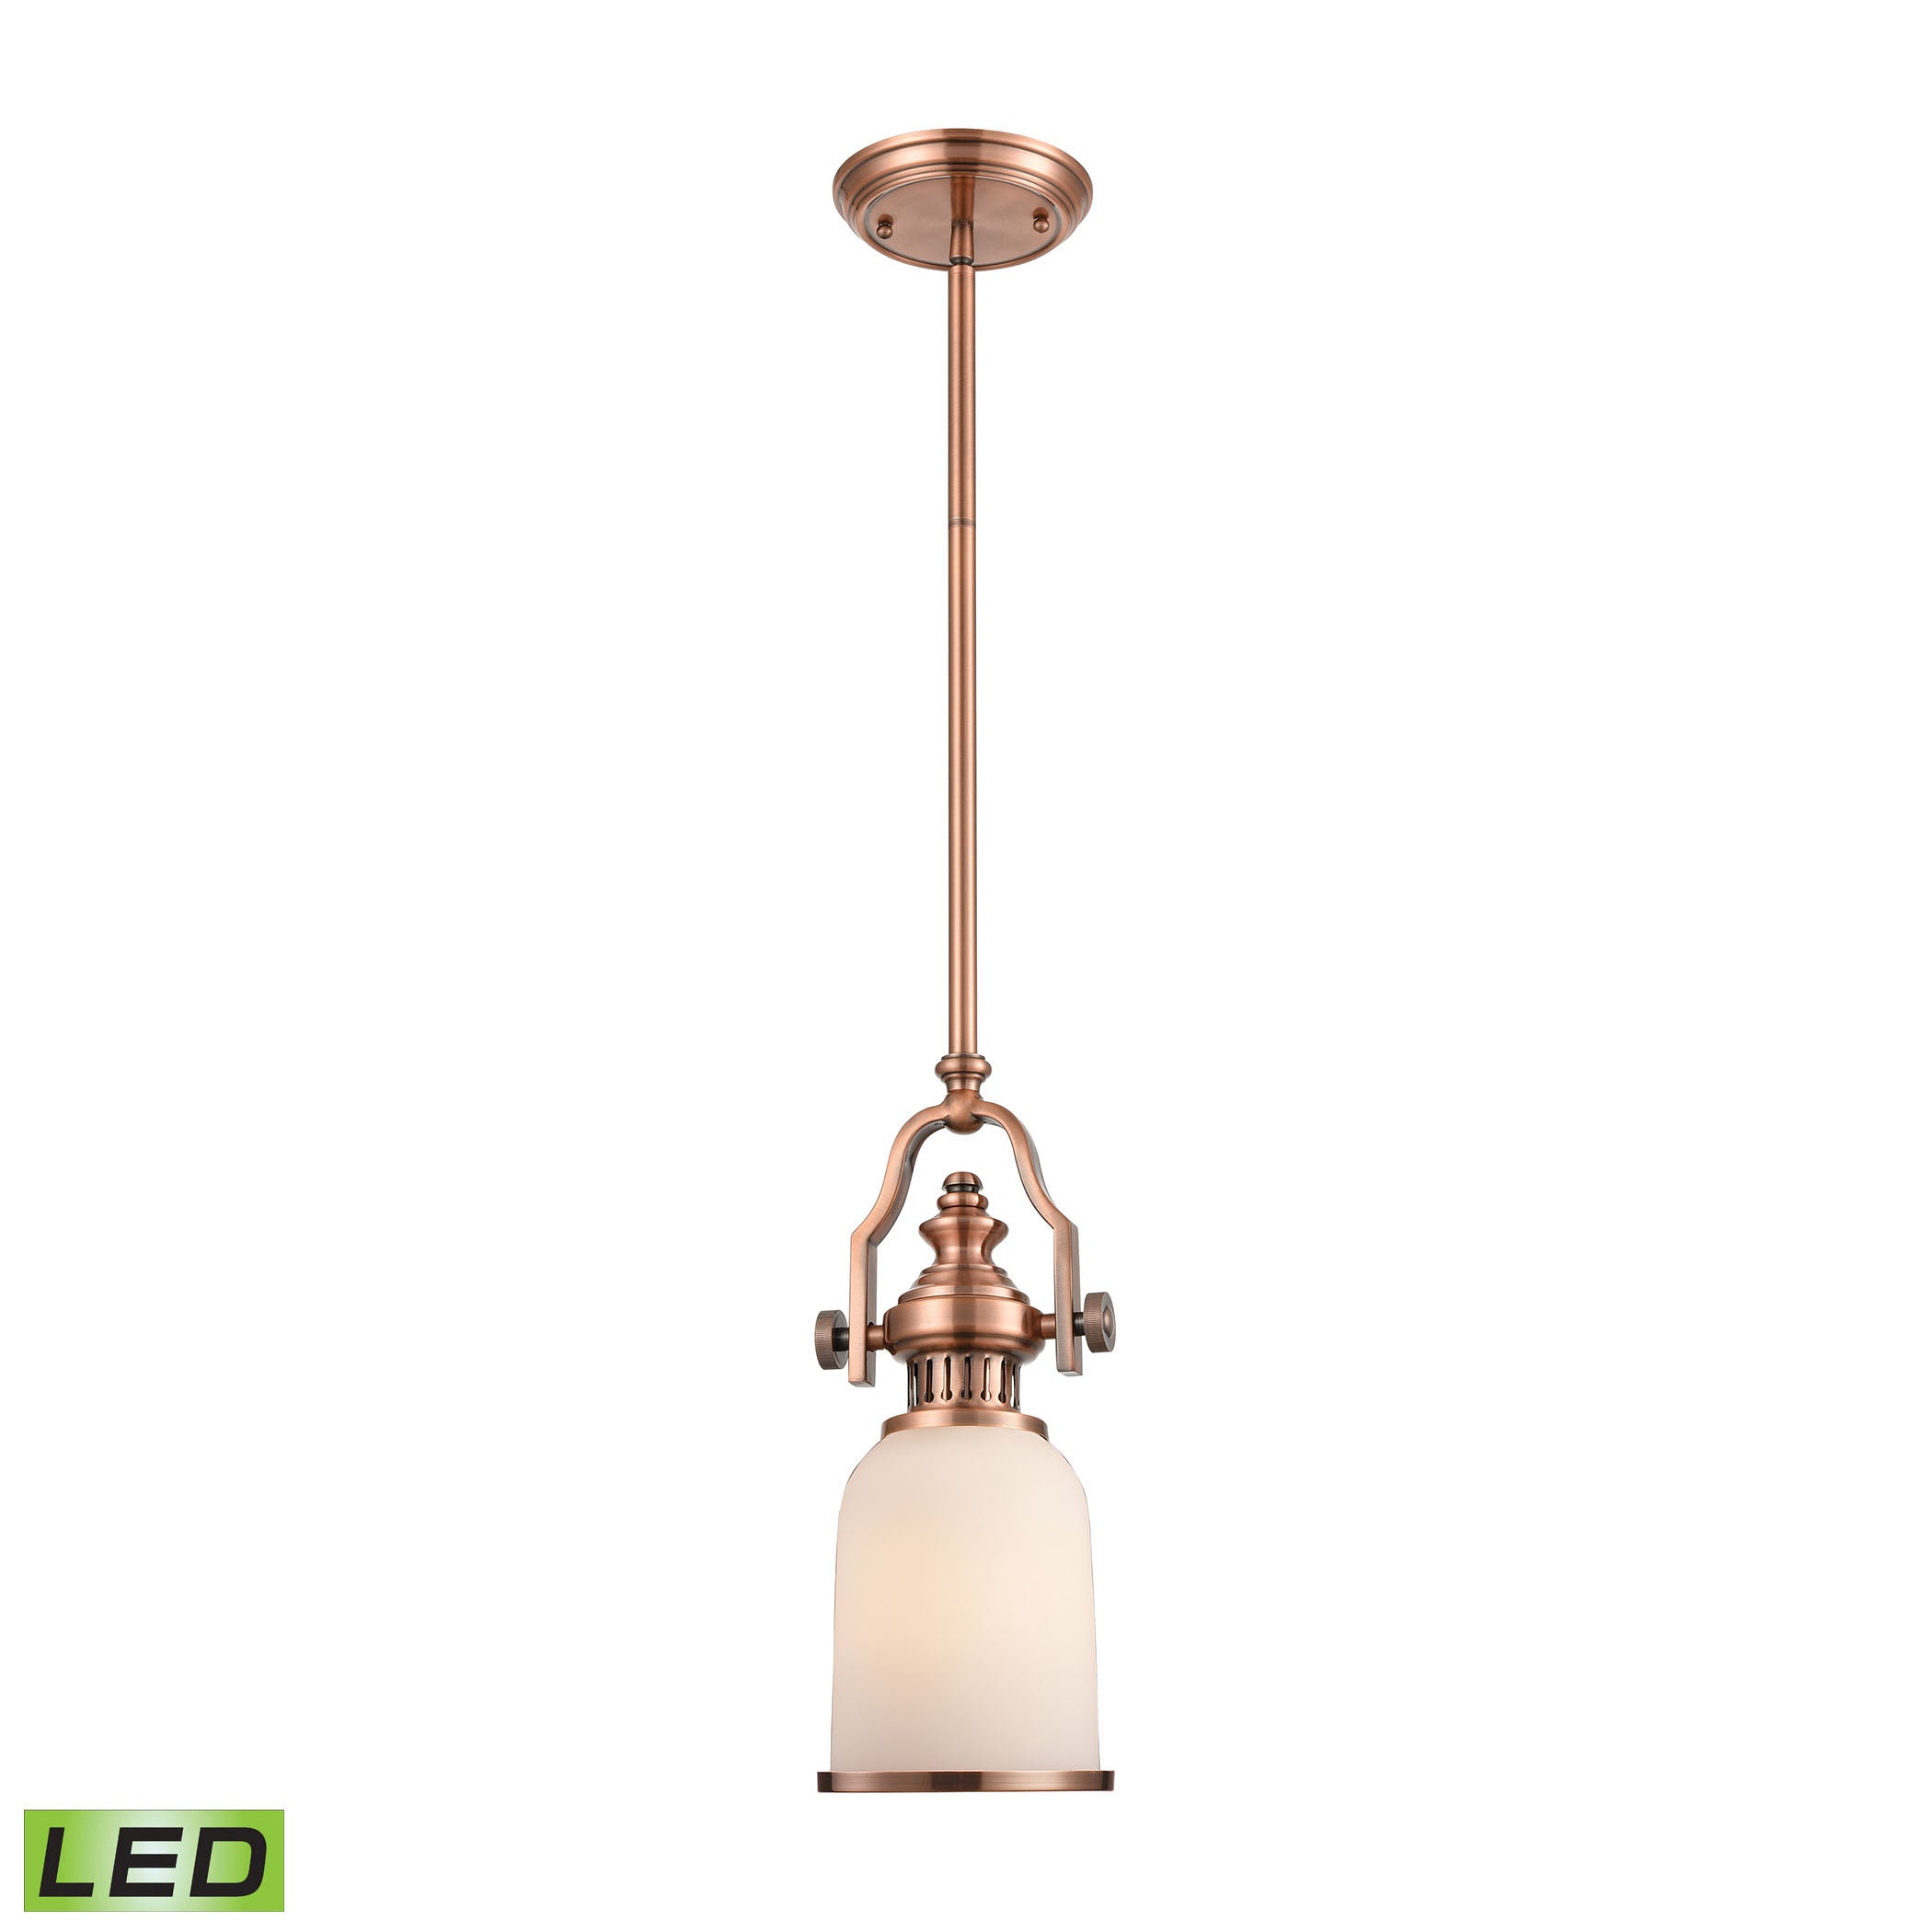 ELK Lighting 66142-1-LED Chadwick 1-Light Mini Pendant in Antique Copper with White Glass - Includes LED Bulb